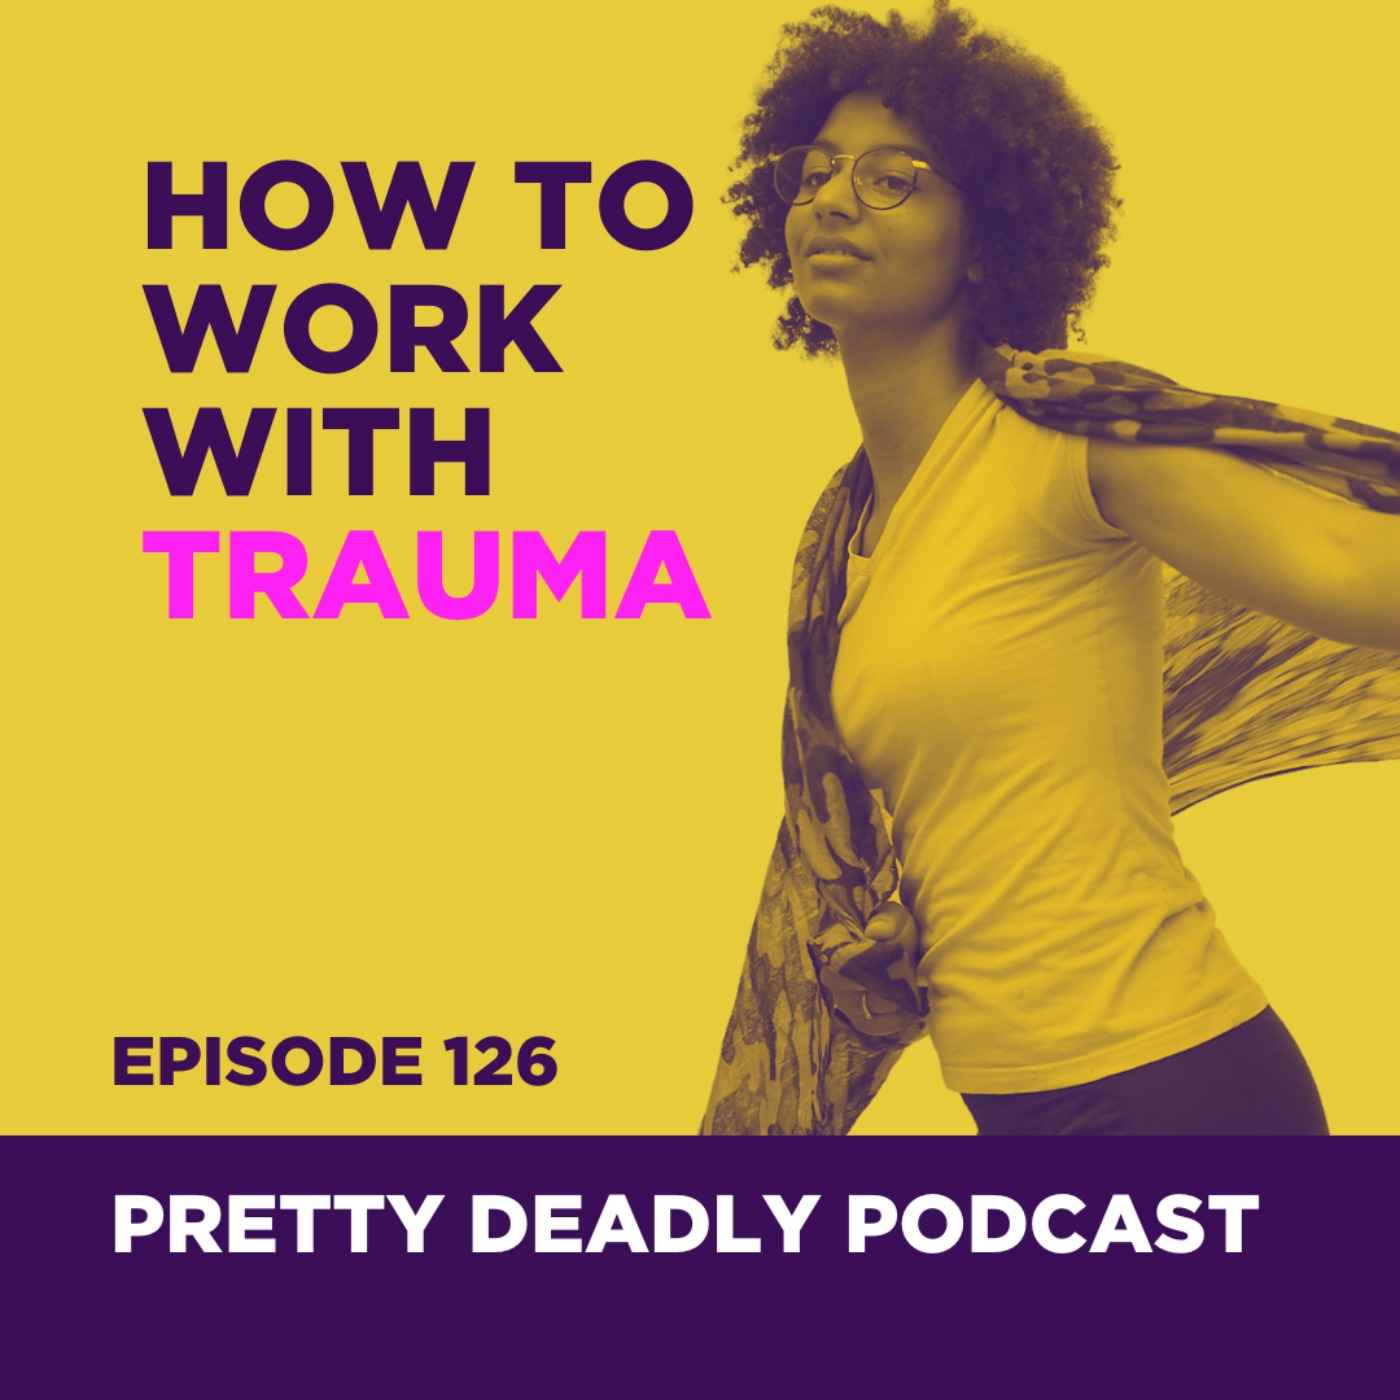 S8 Episode 126: How to Work with Trauma | Pretty Deadly Podcast